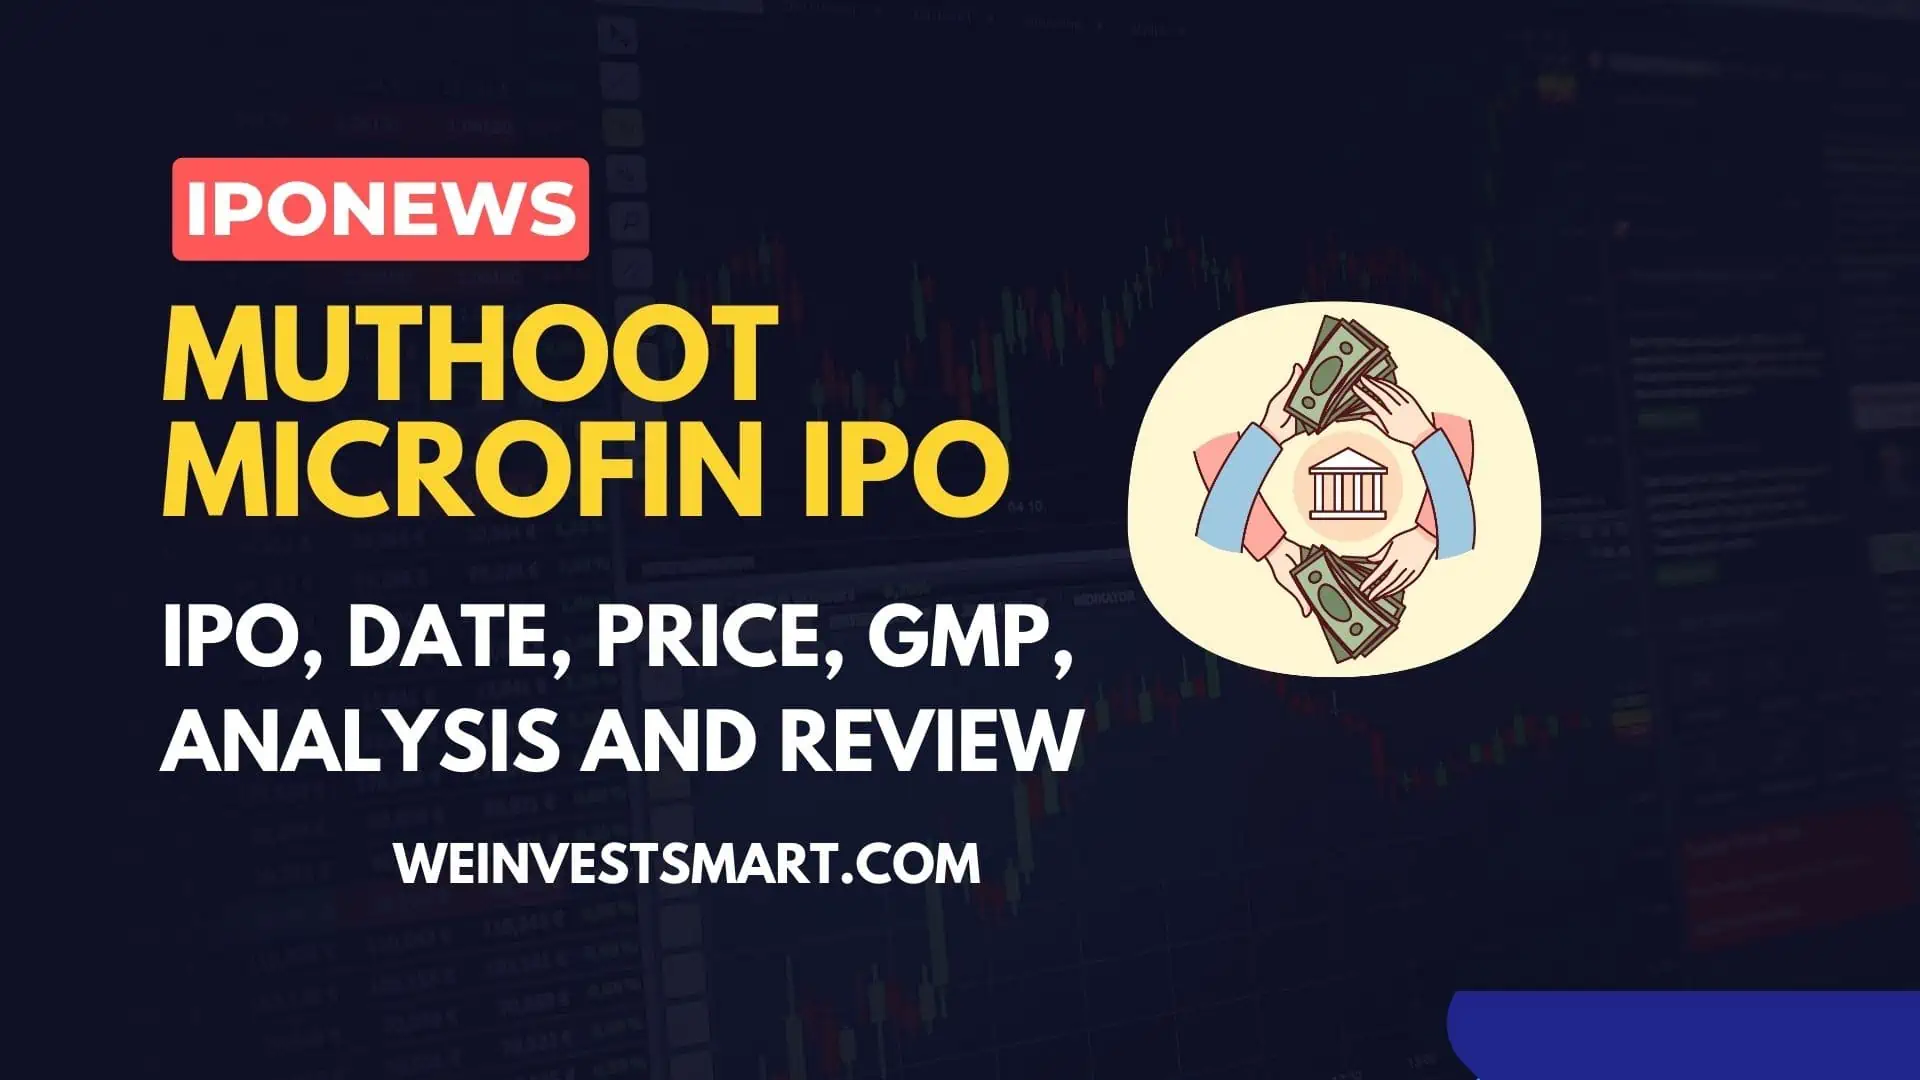 Muthoot Microfin IPO Date, Price, Lot Size, GMP Details and Review